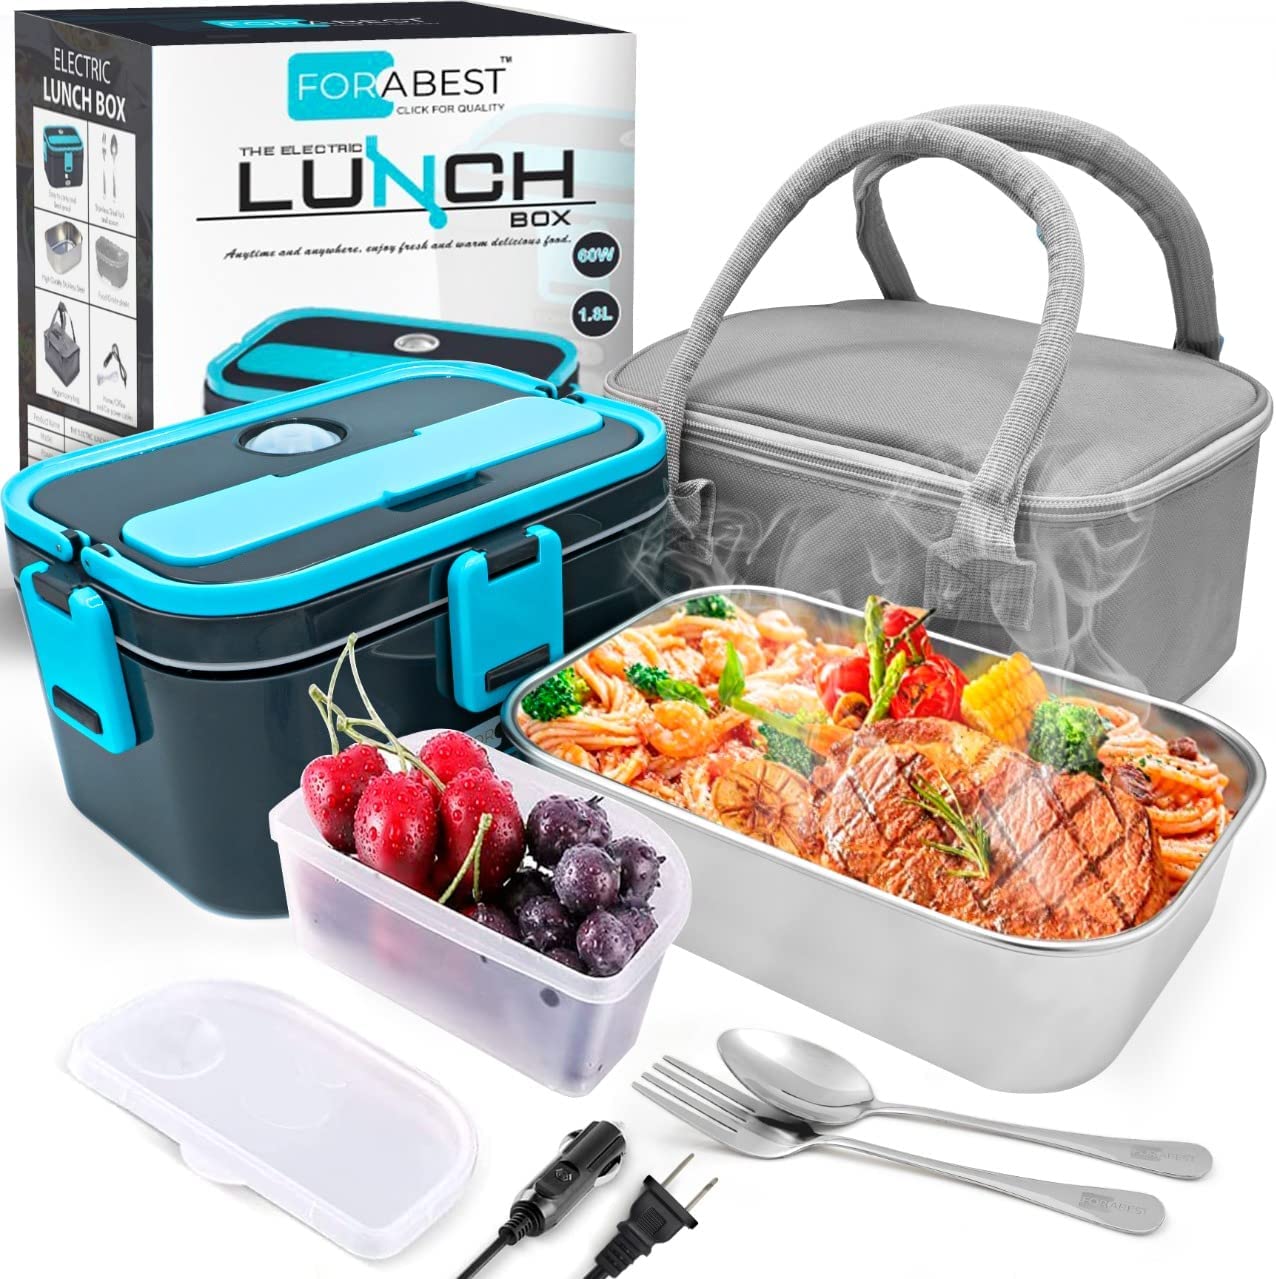 Electric lunch box - Rutos